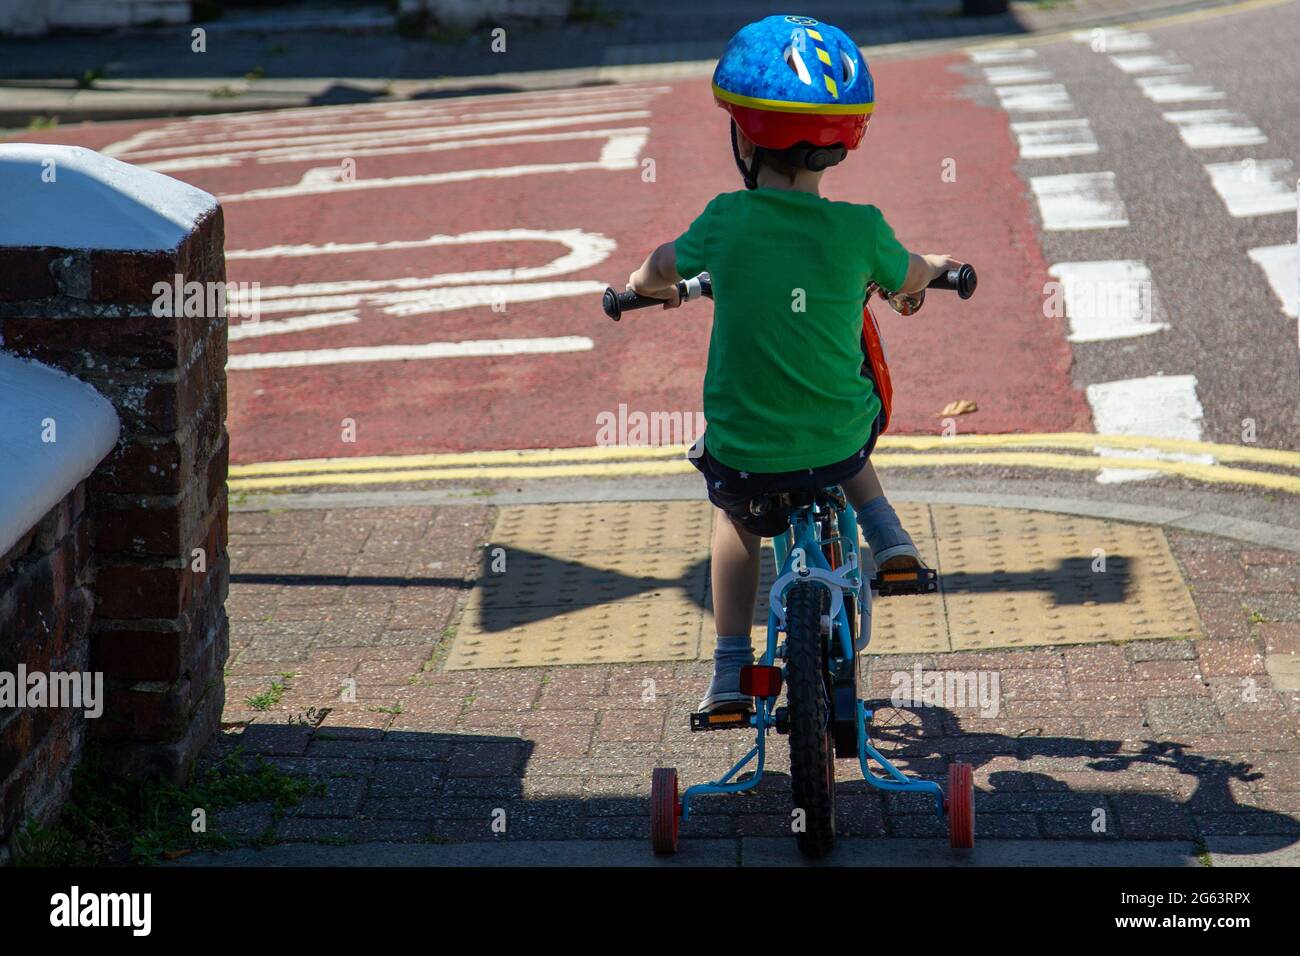 A small child riding a bike with stabilizers or stabailisers wearing a helmet, about to cross a road Stock Photo